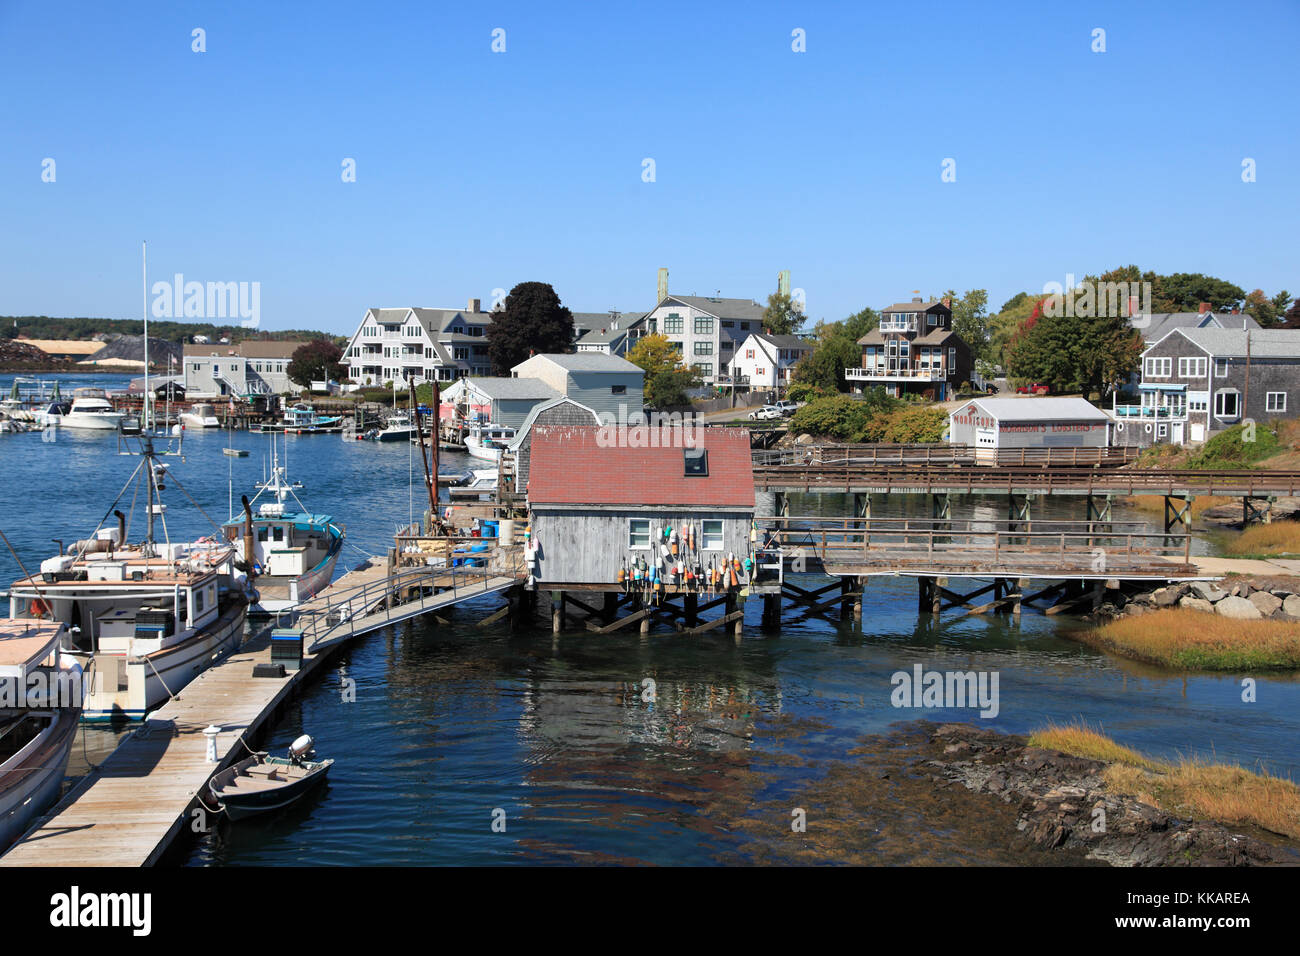 Badger's Island, Kittery, Piscataqua River, Maine, New England, United States of America, North America Stock Photo